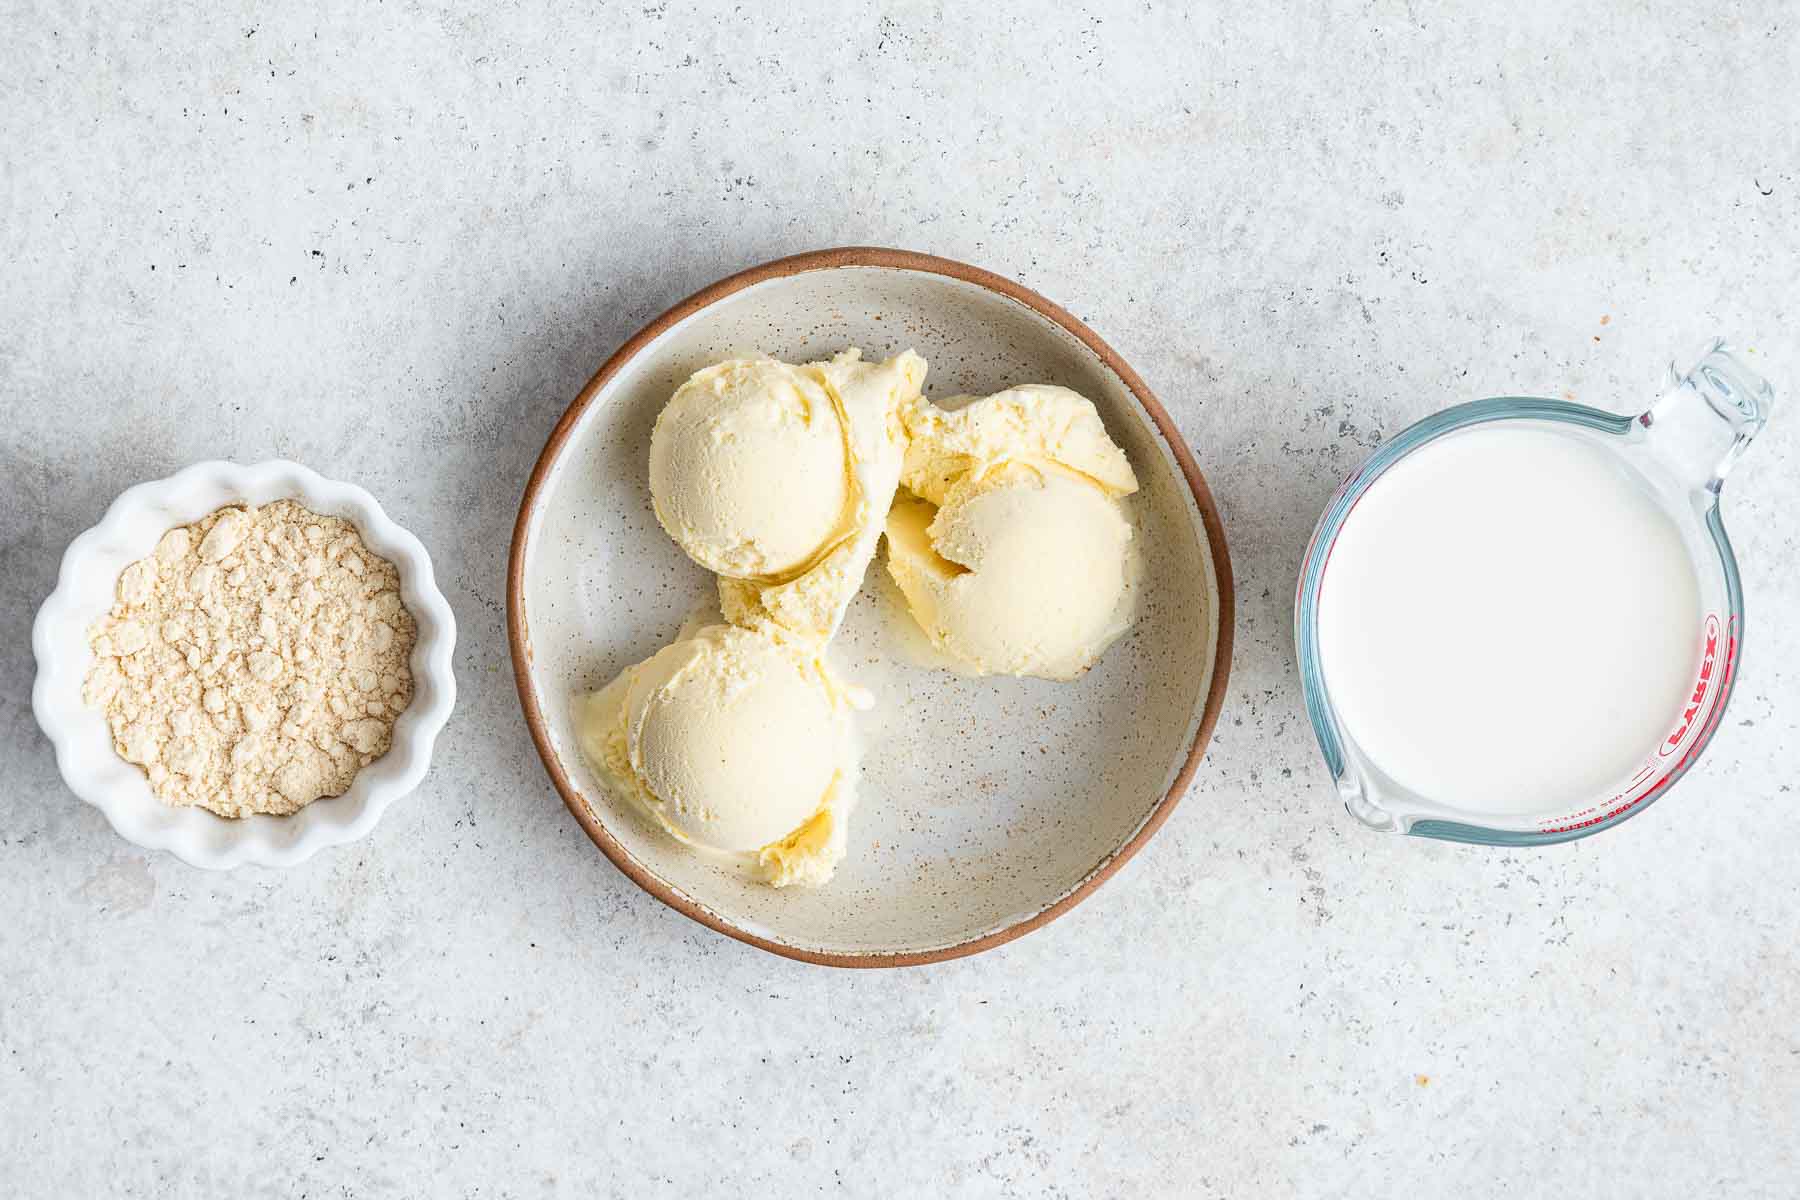 Three plates with scoops of vanilla ice cream, milk and malted milk powder on counter.